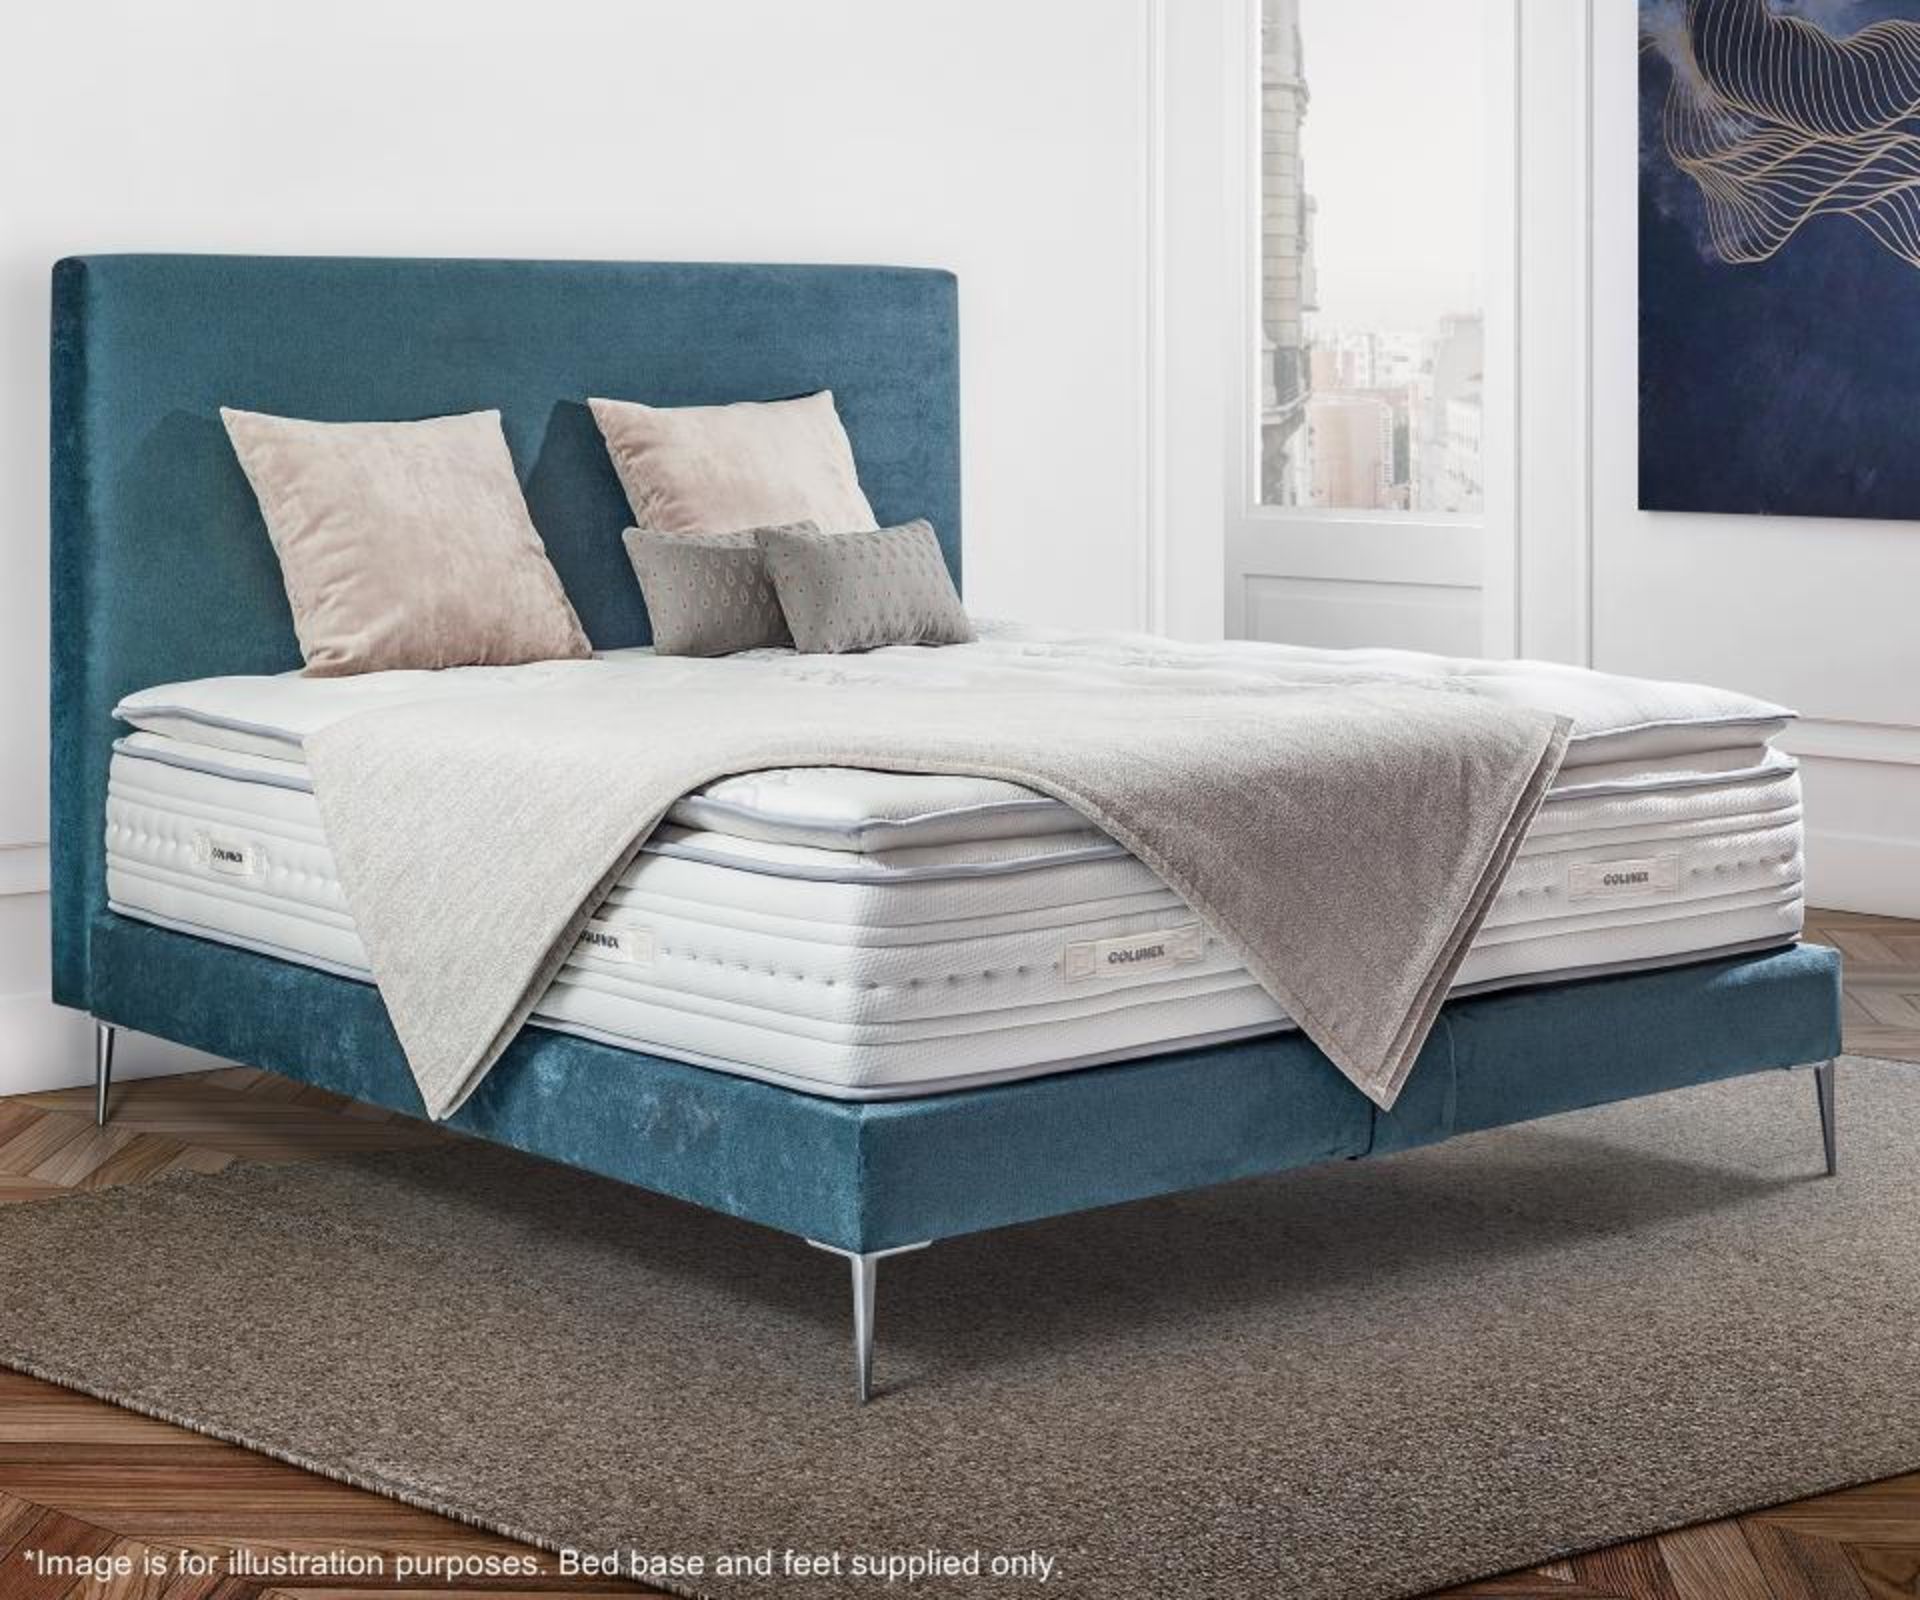 1 x Colunex 'Easy' Kingsize Bed Base - Upholstered In Grey Leather With Stylish Metal Feet - Dimensi